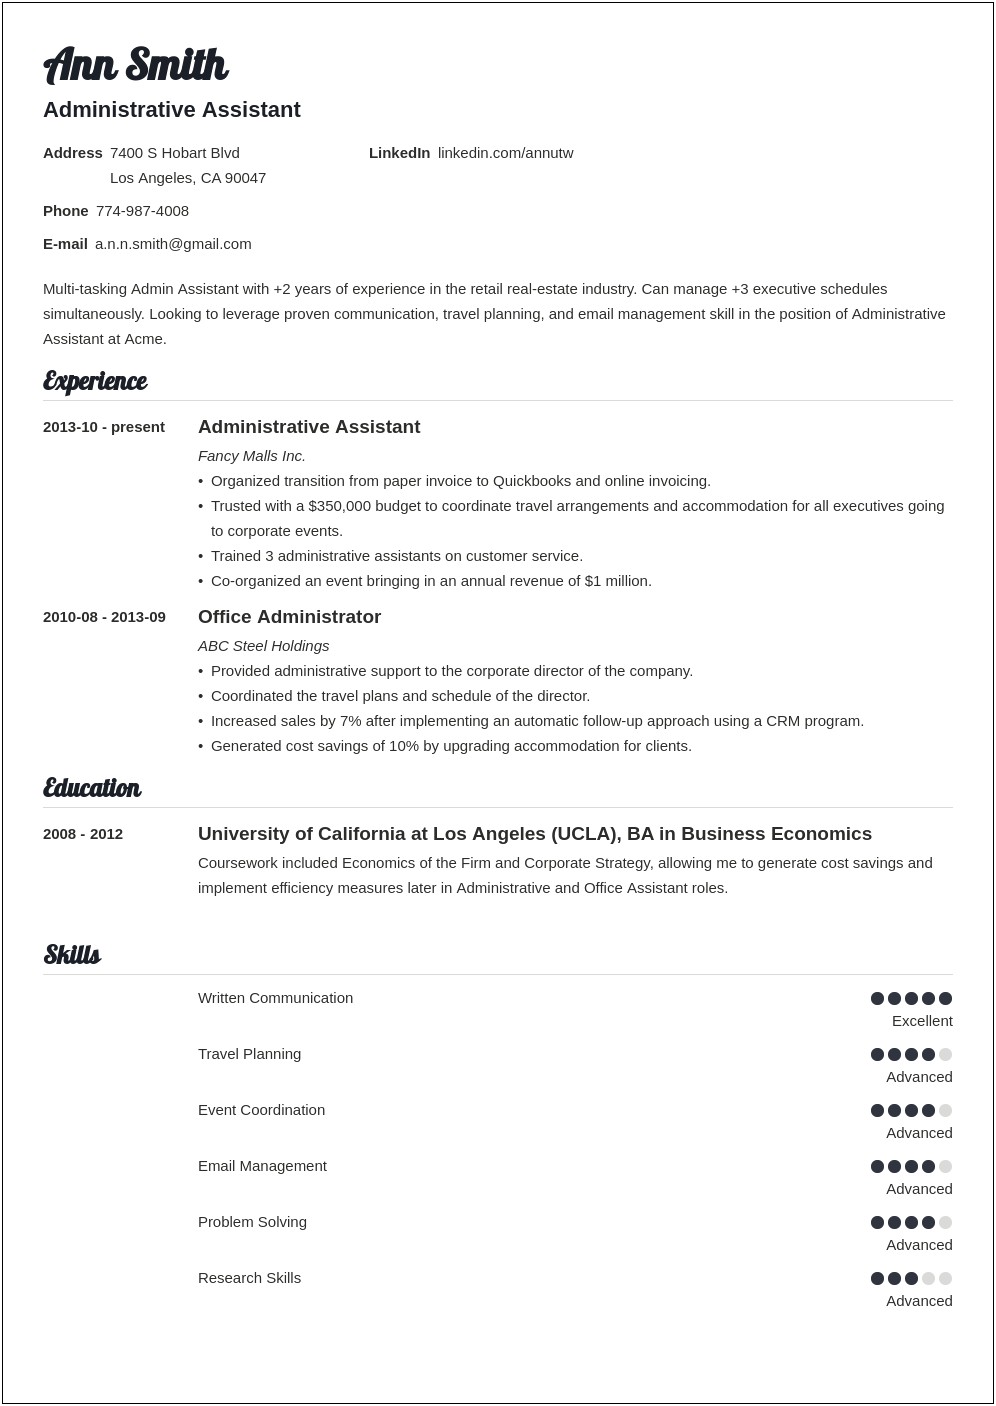 Sample Administrative Assistant Resume 2017